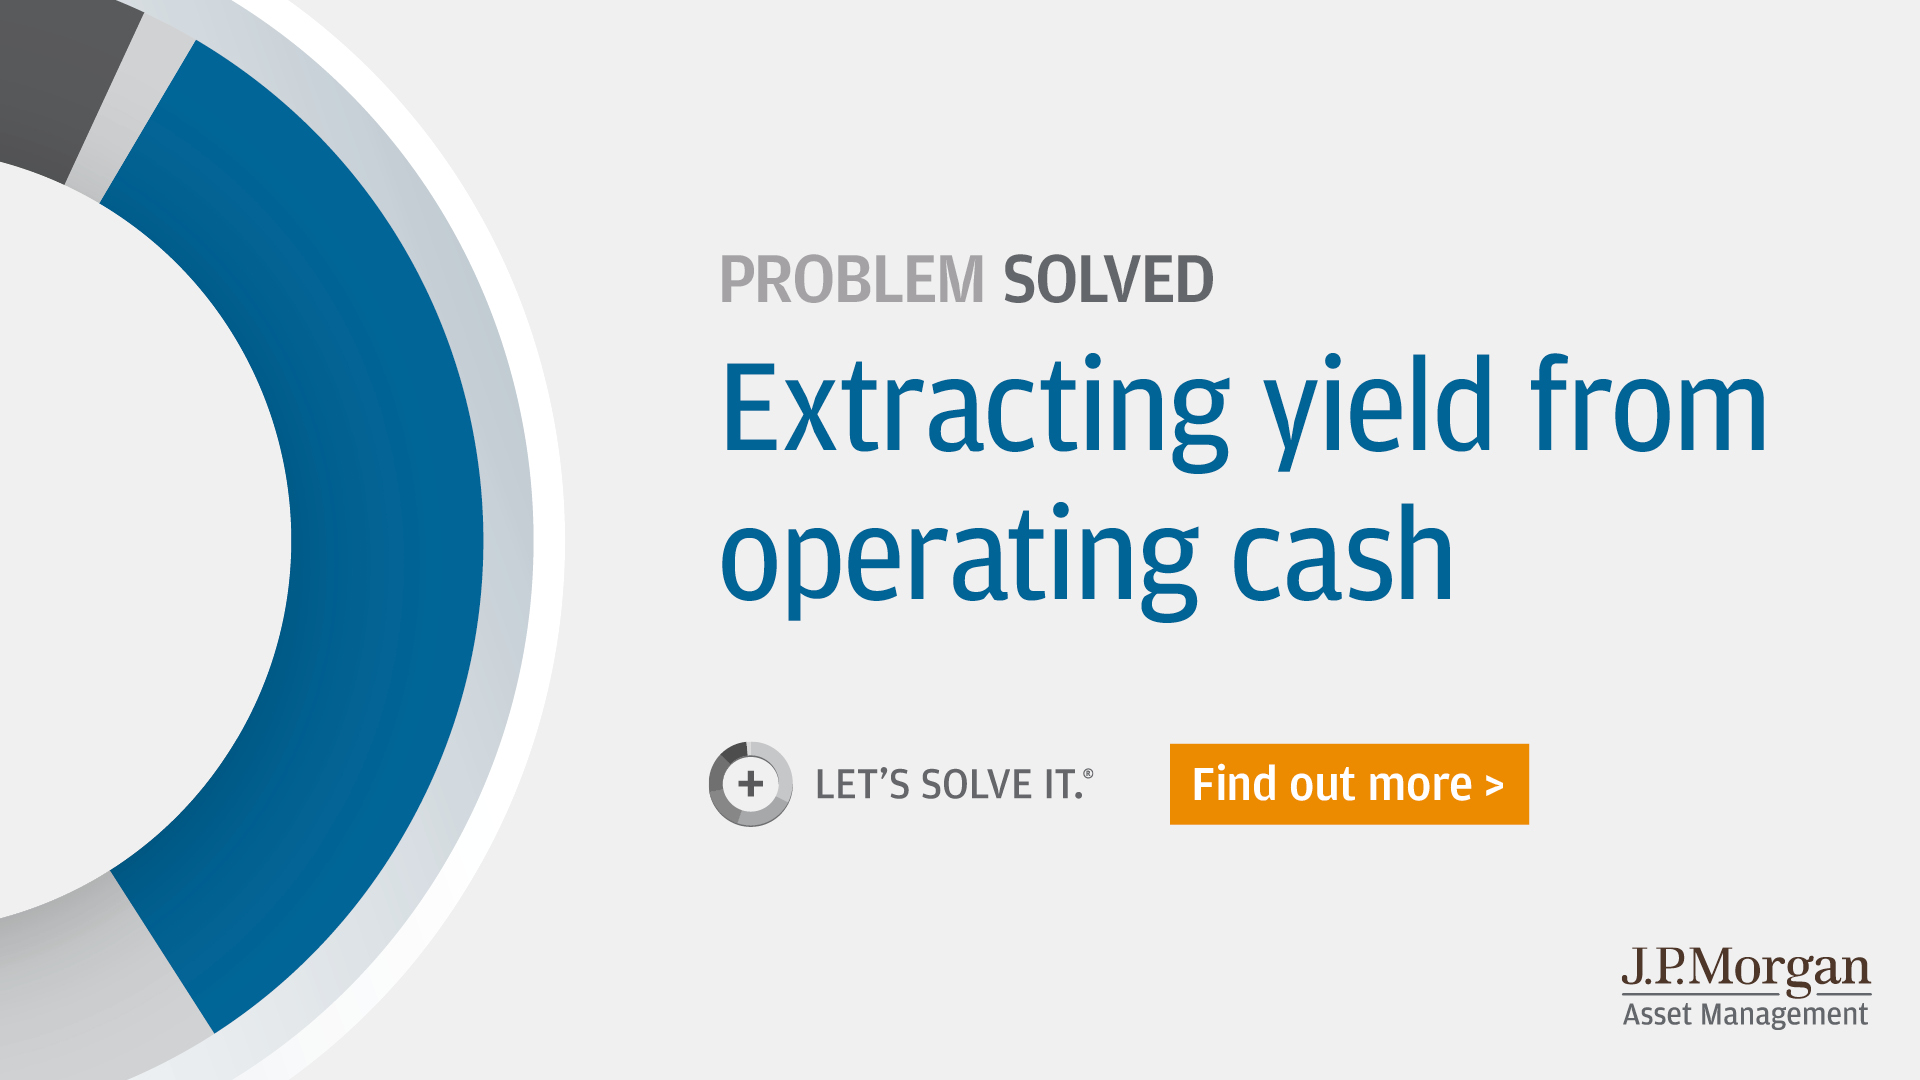 J.P. Morgan Asset Management – Problem solved: Extracting yield from operating cash